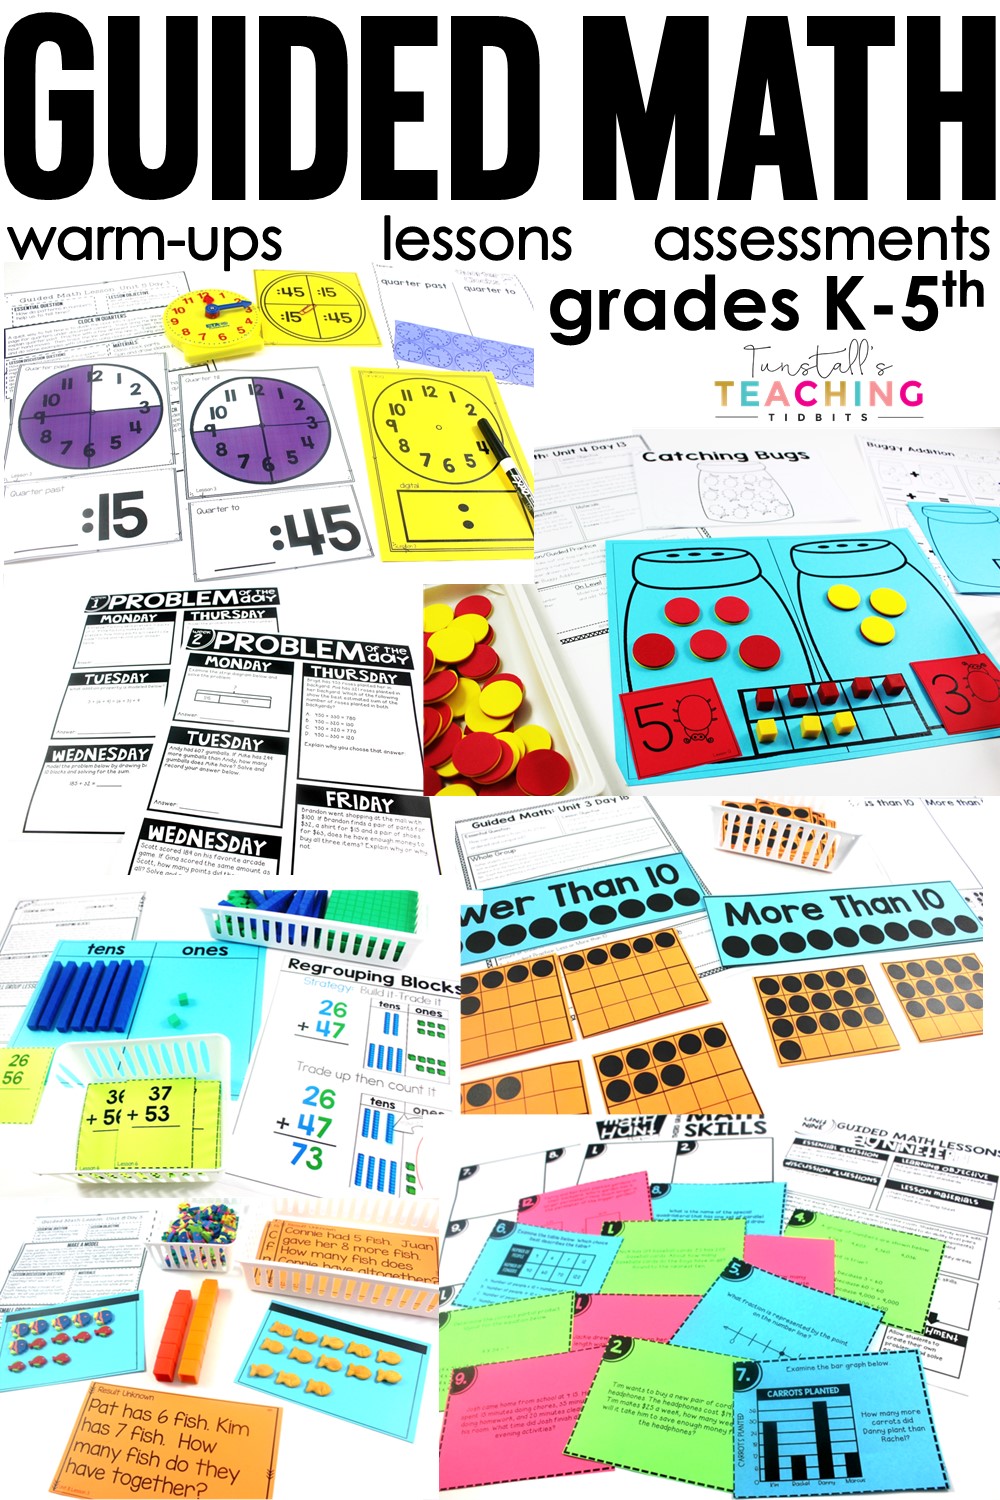 lesson-plans-for-the-guided-math-structure-tunstall-s-teaching